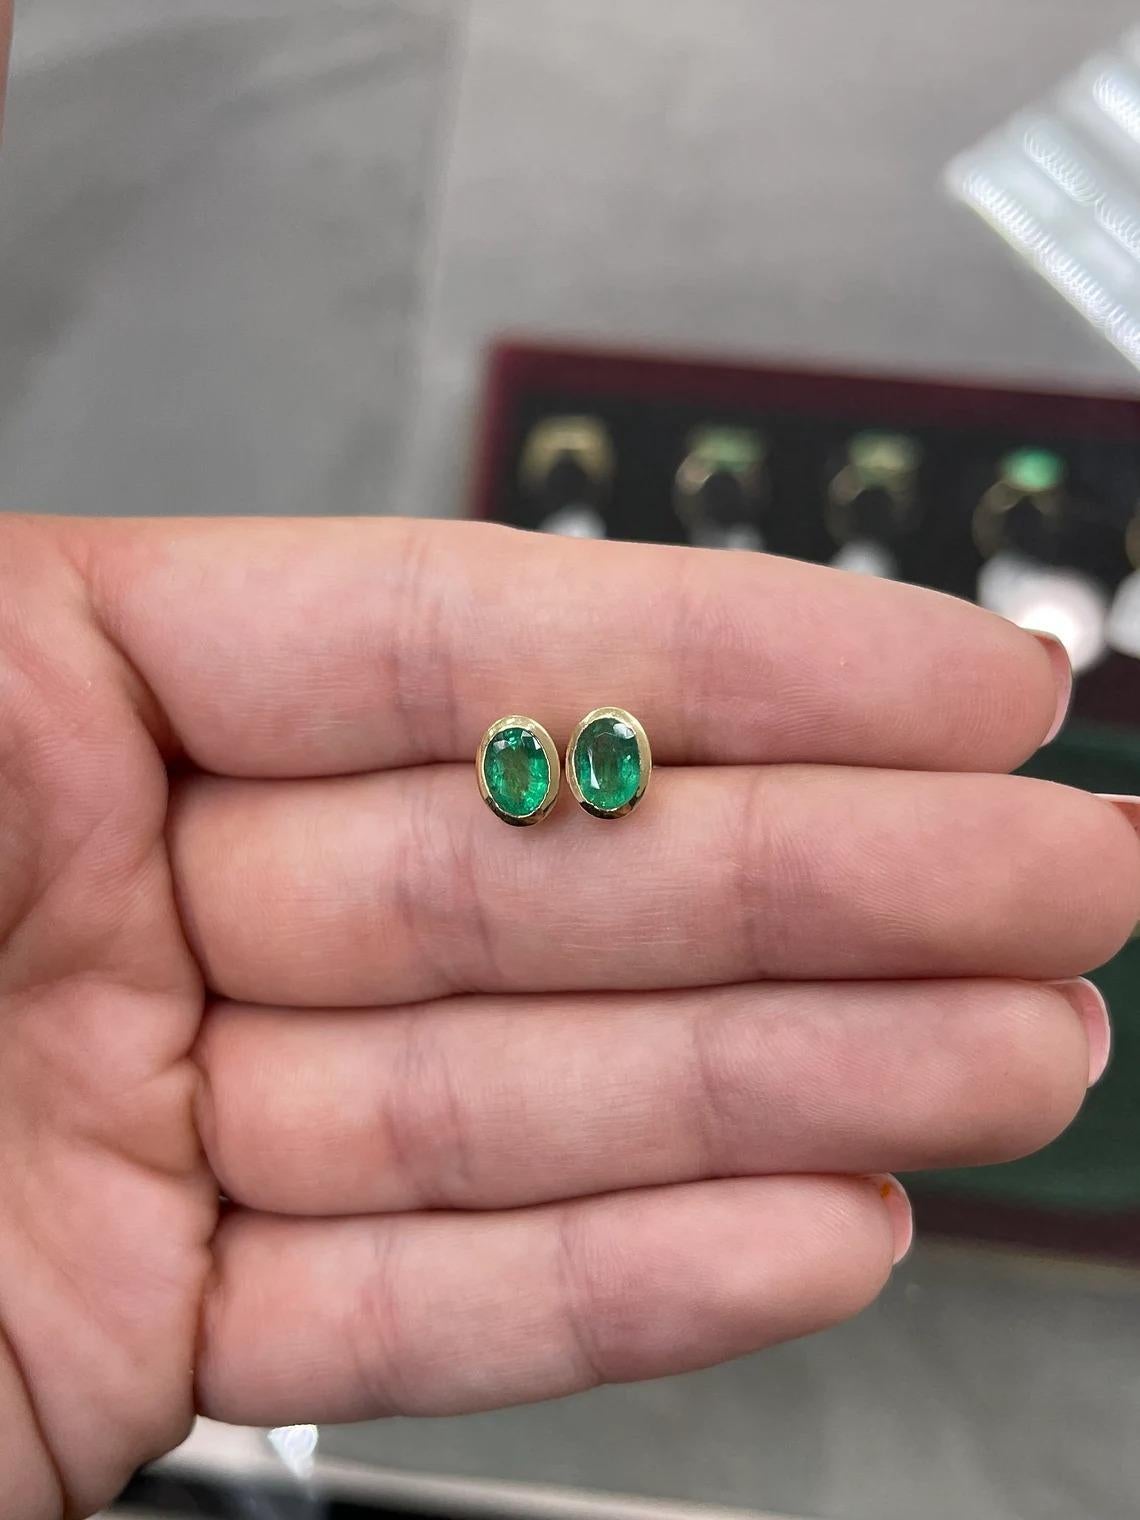 Displayed are gorgeous bezel set natural oval Zambian emeralds yellow gold bezel studs in 14K. These gold stud earrings are handmade by our expert jeweler and sparkle with an approximate total weight of 1.87 carats of natural emeralds. The gemstones